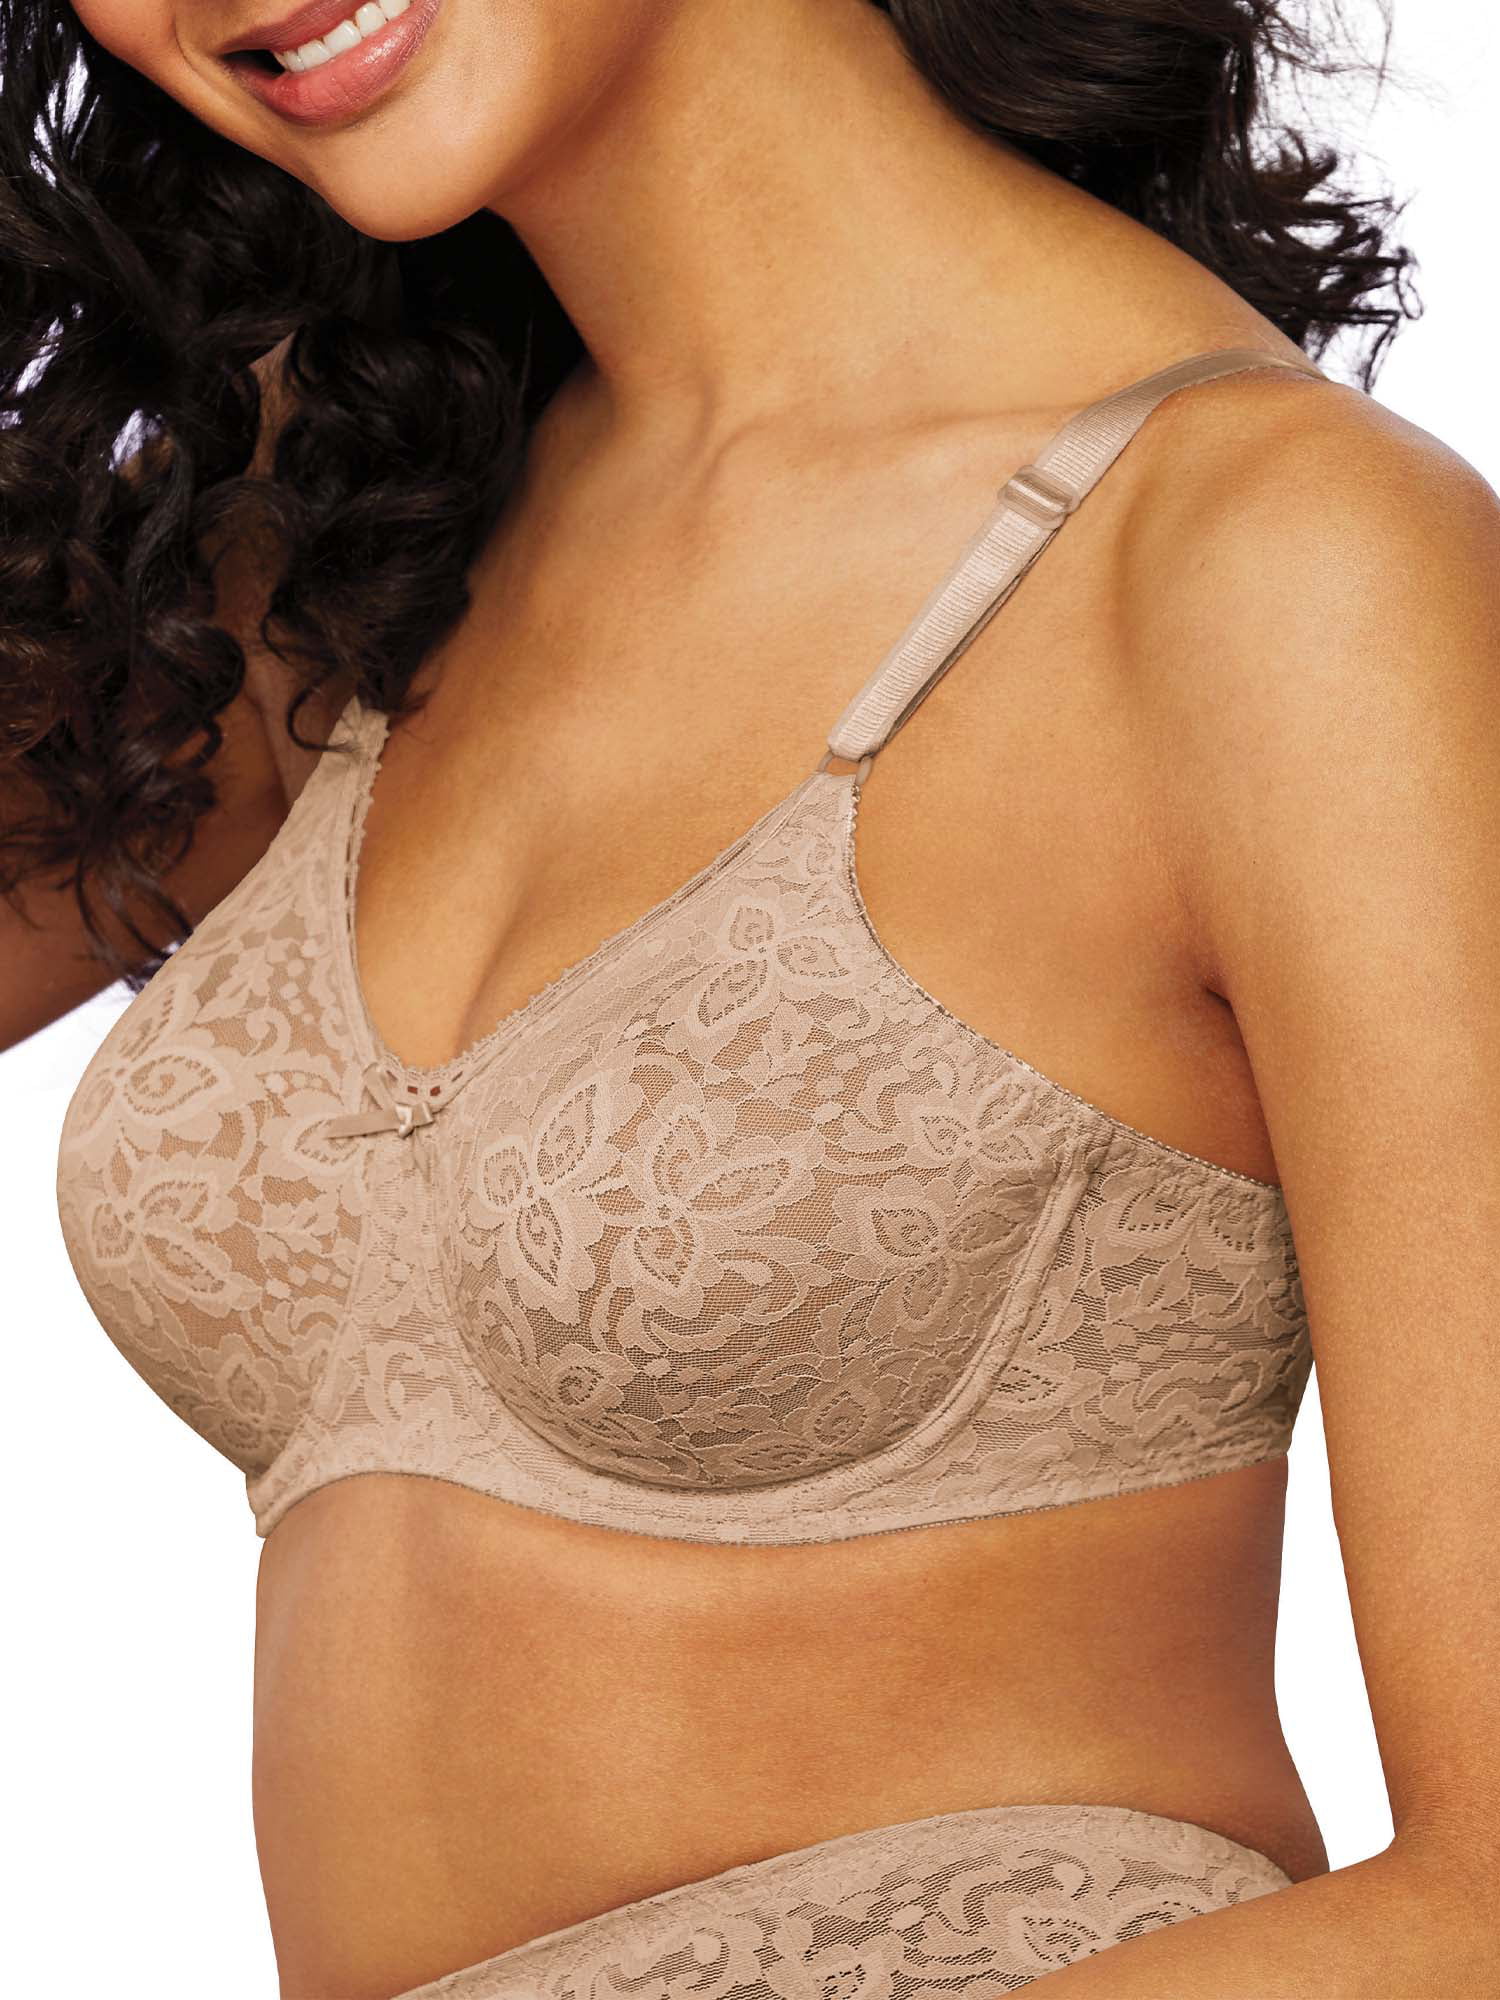 Bali 3432 Lace Smooth Seamless Underwire Bra Size 36c White for